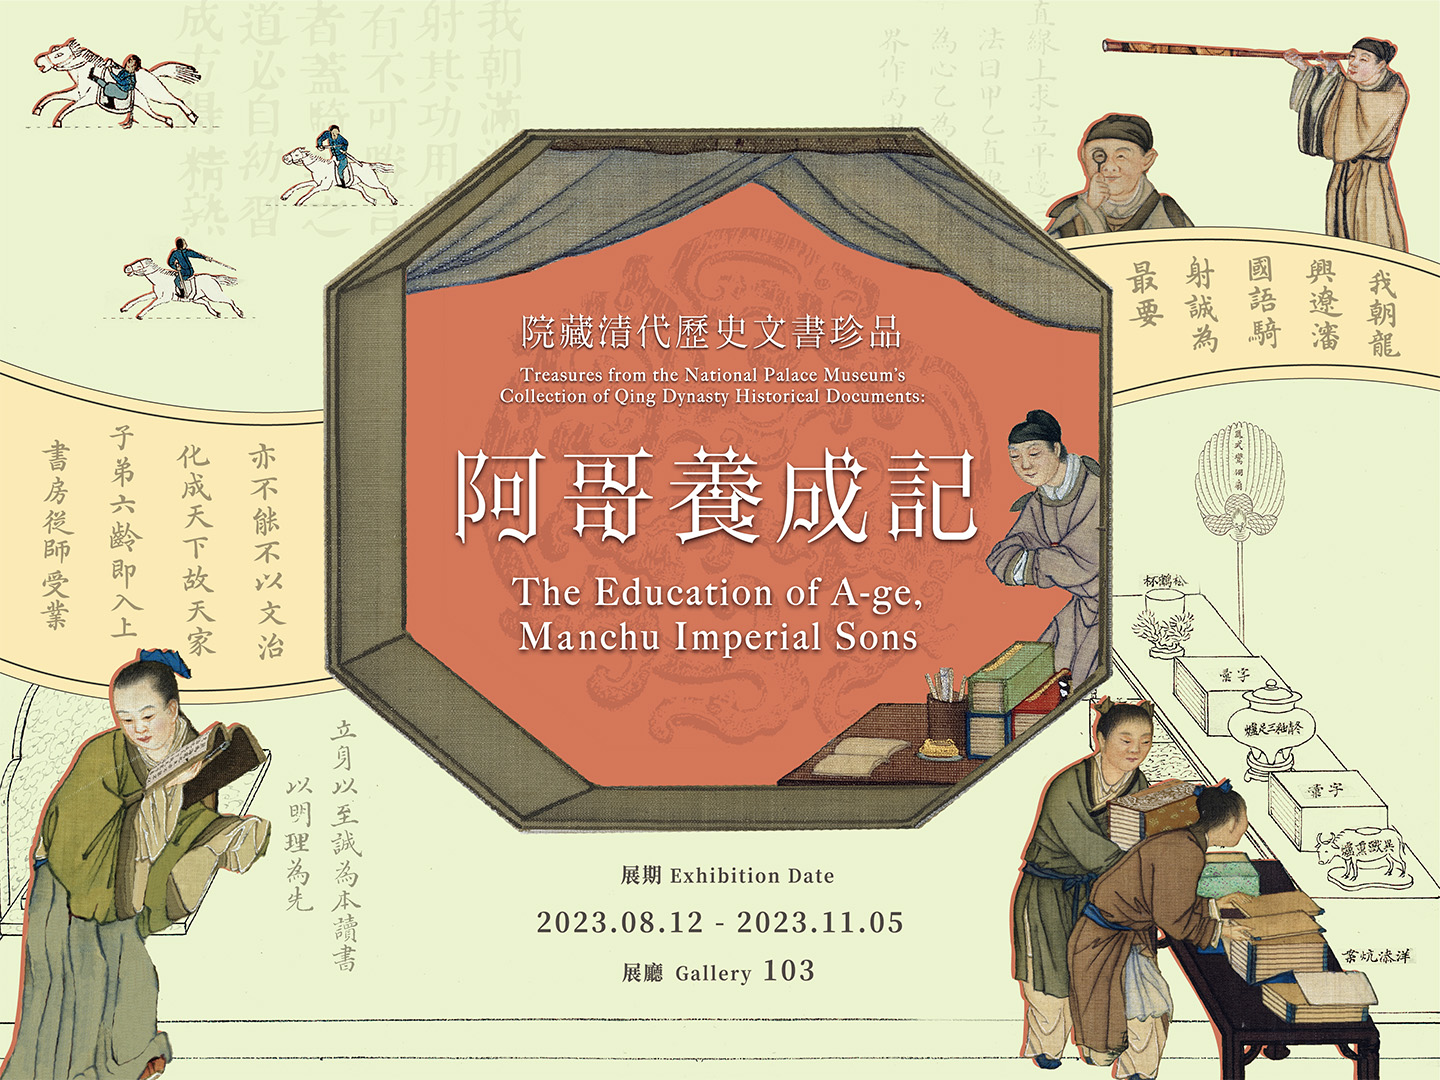 Treasures from the National Palace Museum’s Collection of Qing Dynasty Historical Documents: The Edupreview